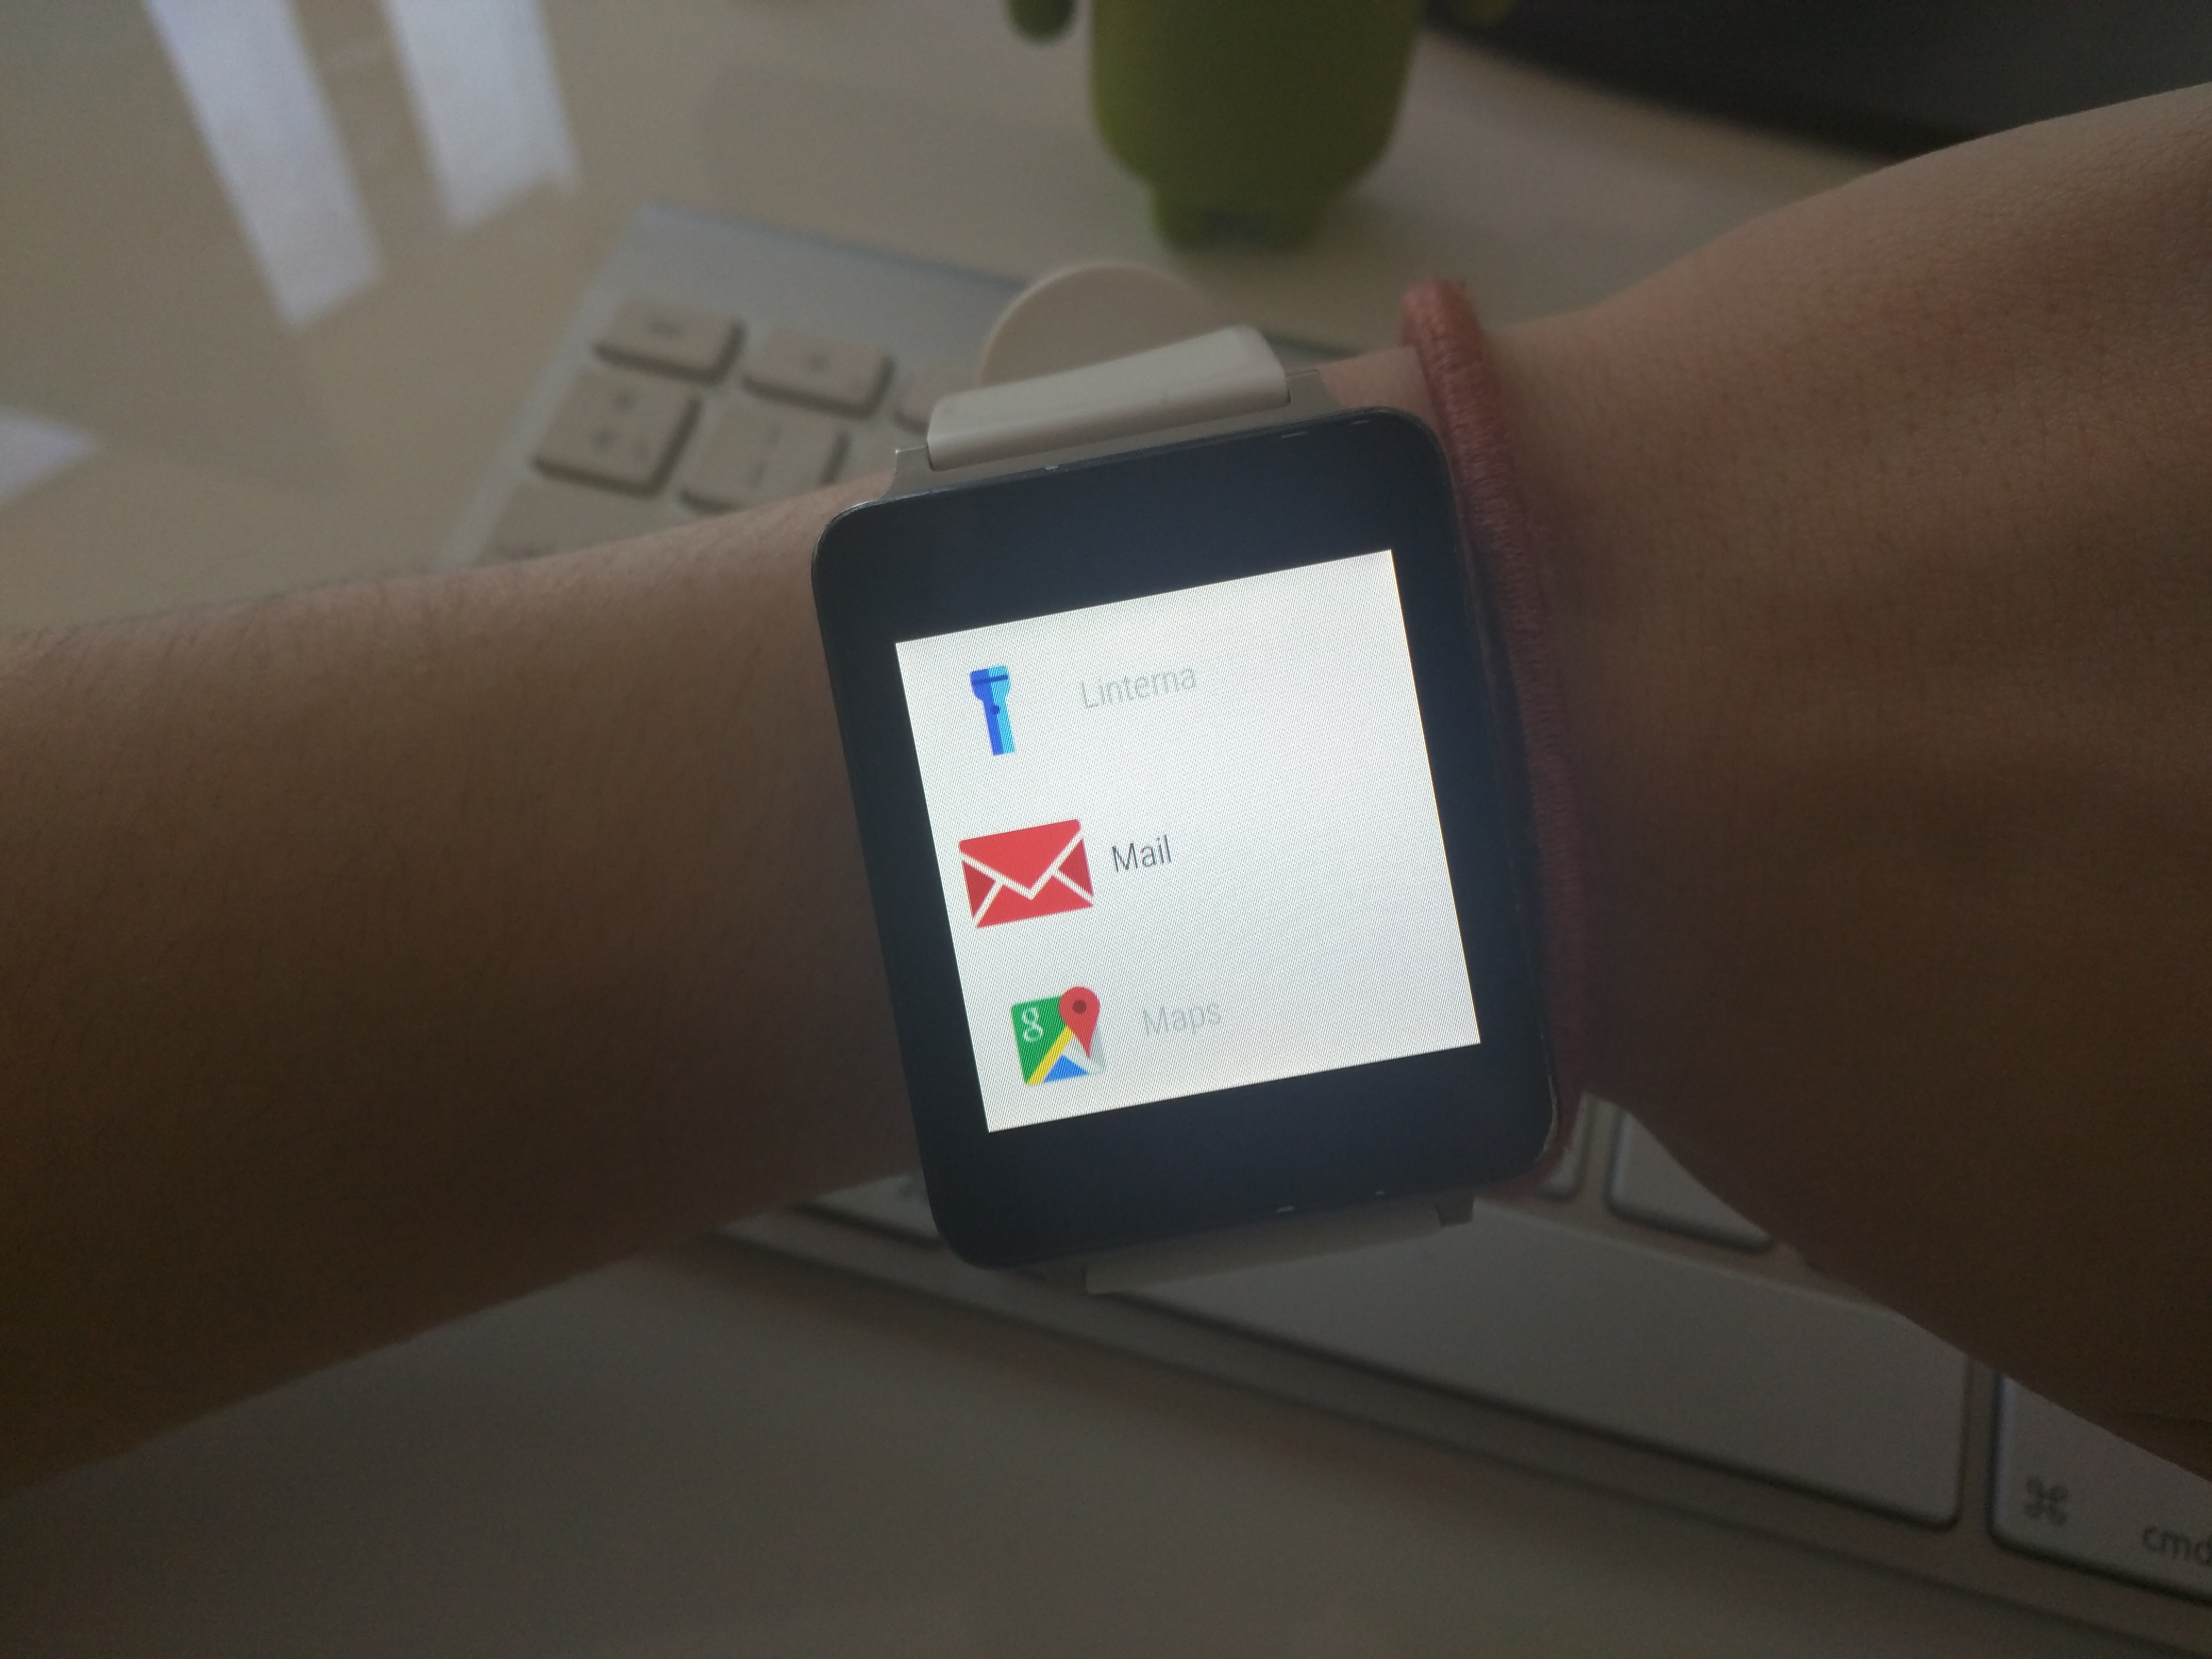 responder-leer-correos-gmail-android-wear-5.1.1